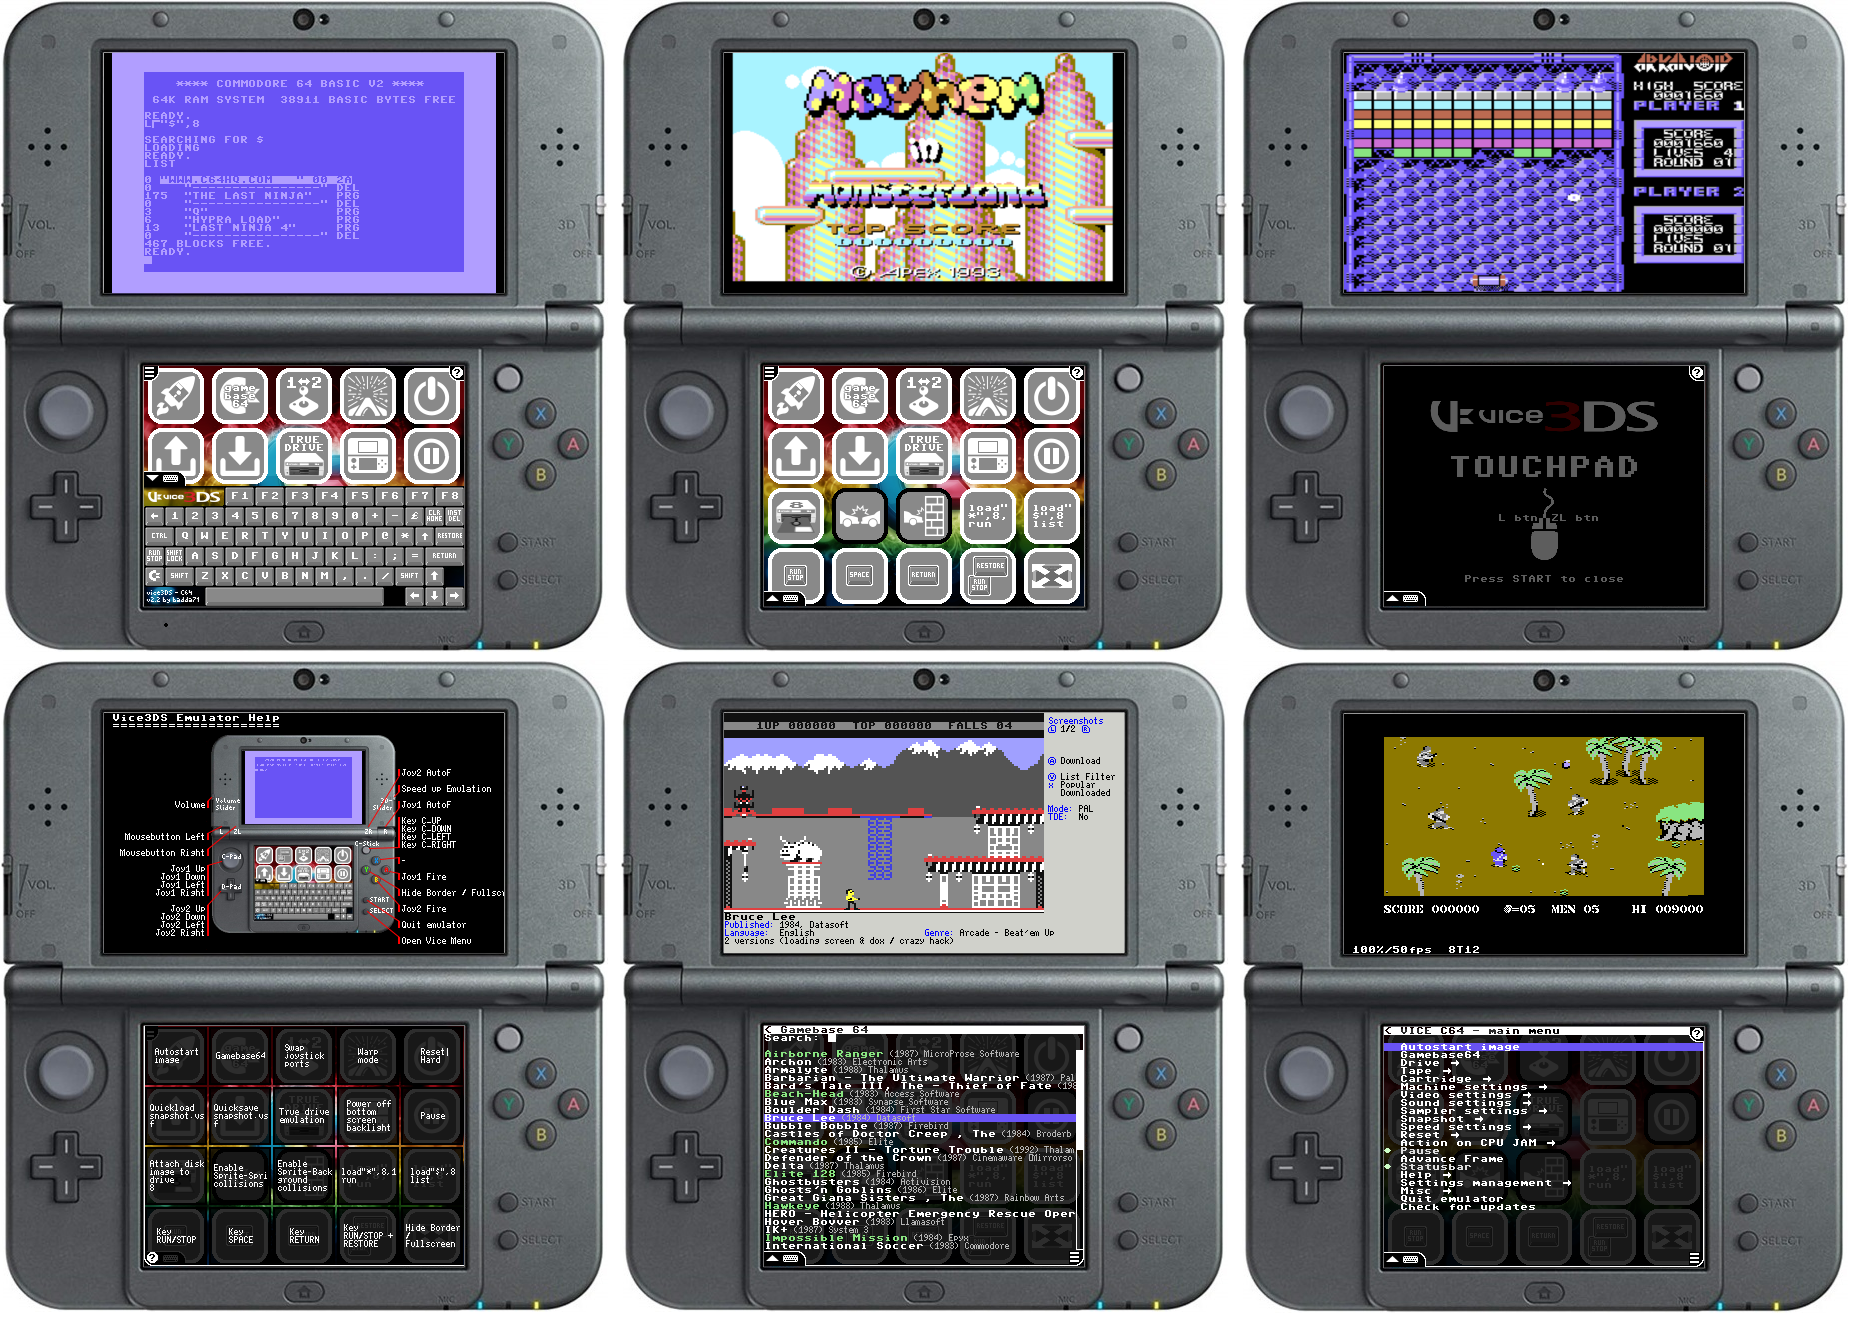 All Nintendo 3DS Games Download 